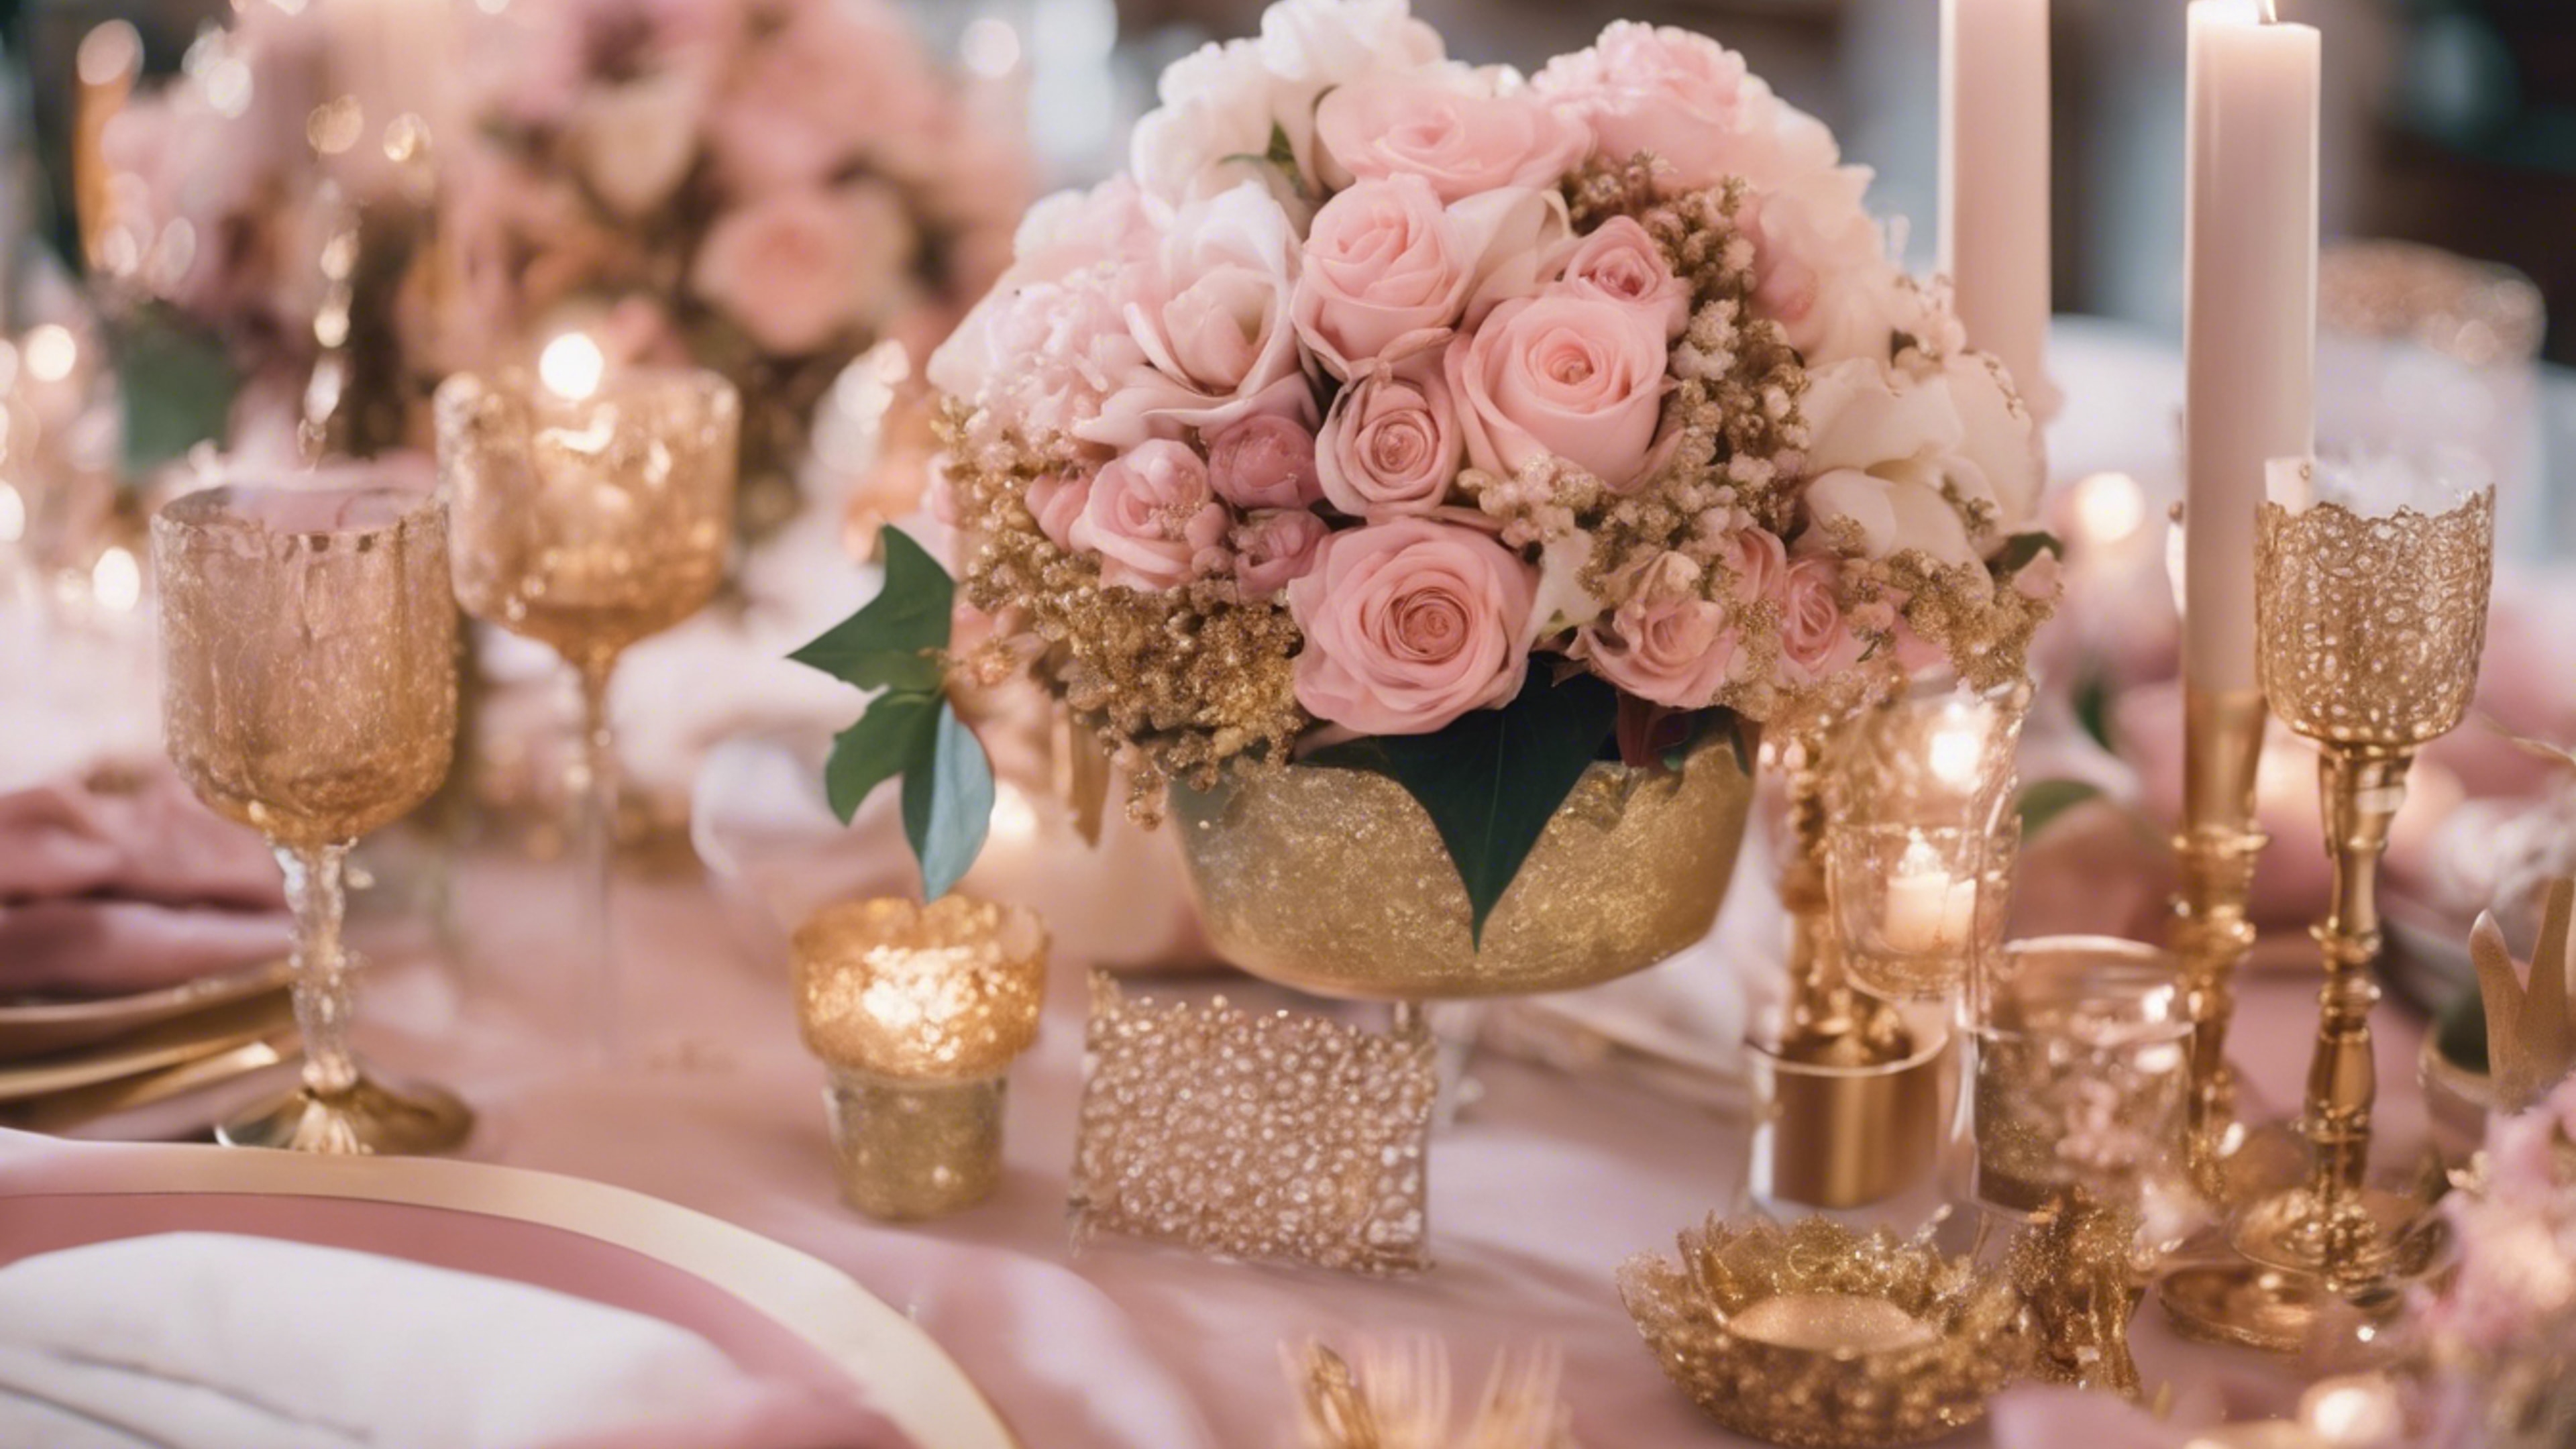 An ethereal pink and gold themed wedding decorations with flowers and metallic accents. duvar kağıdı[814998f188fb45f48f1c]